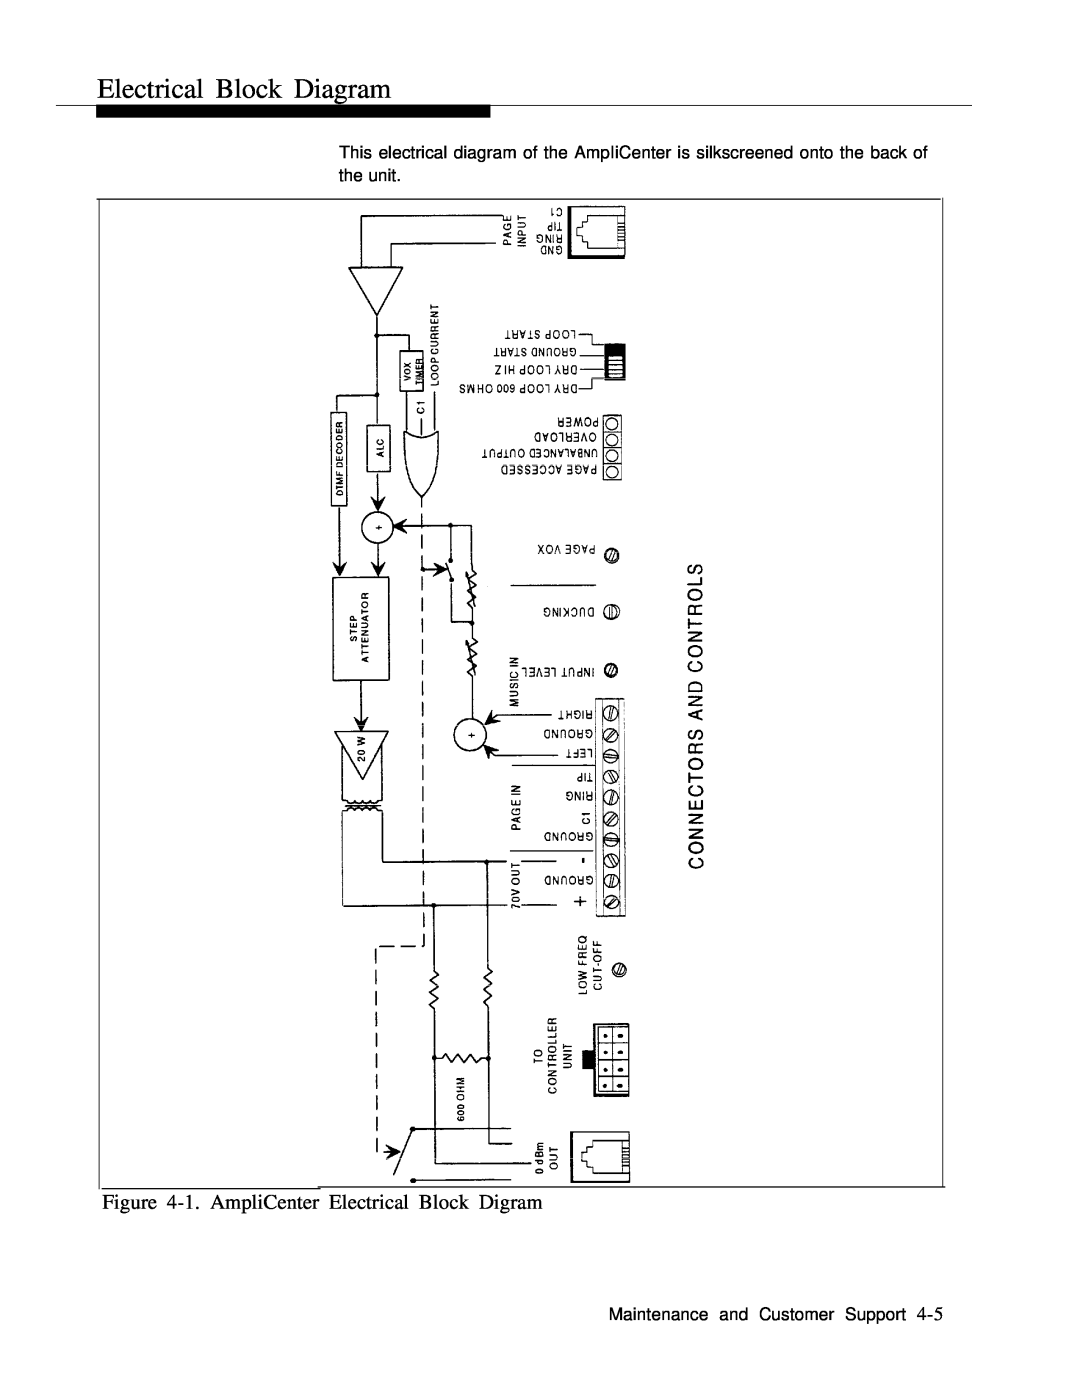 ATTO Technology 463-248-202 manual Electrical Block Diagram, 1.AmpliCenter Electrical Block Digram 